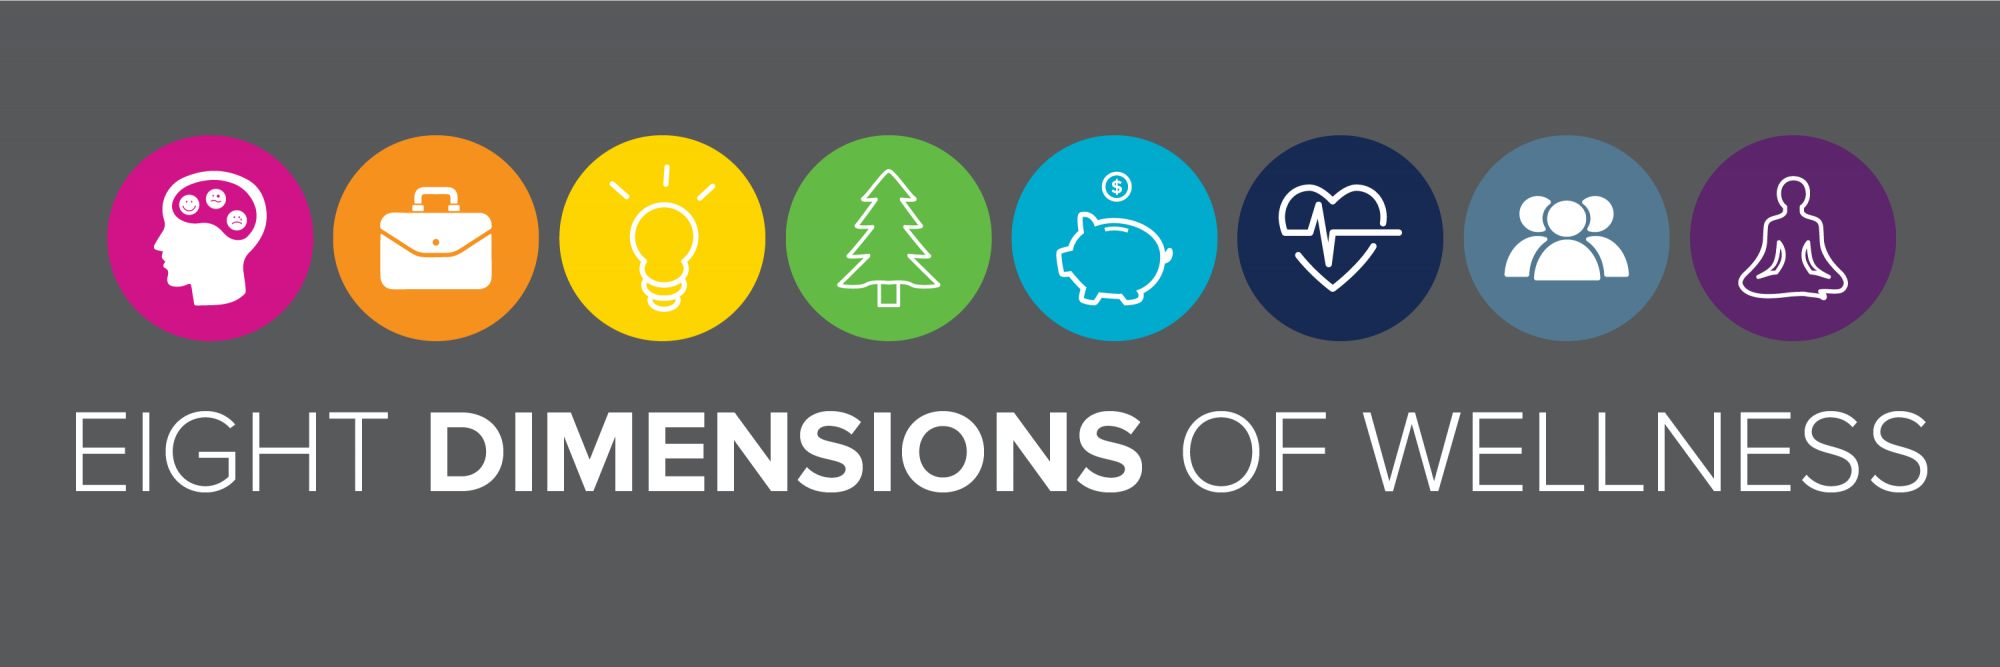 Eight Dimensions of Wellness banner